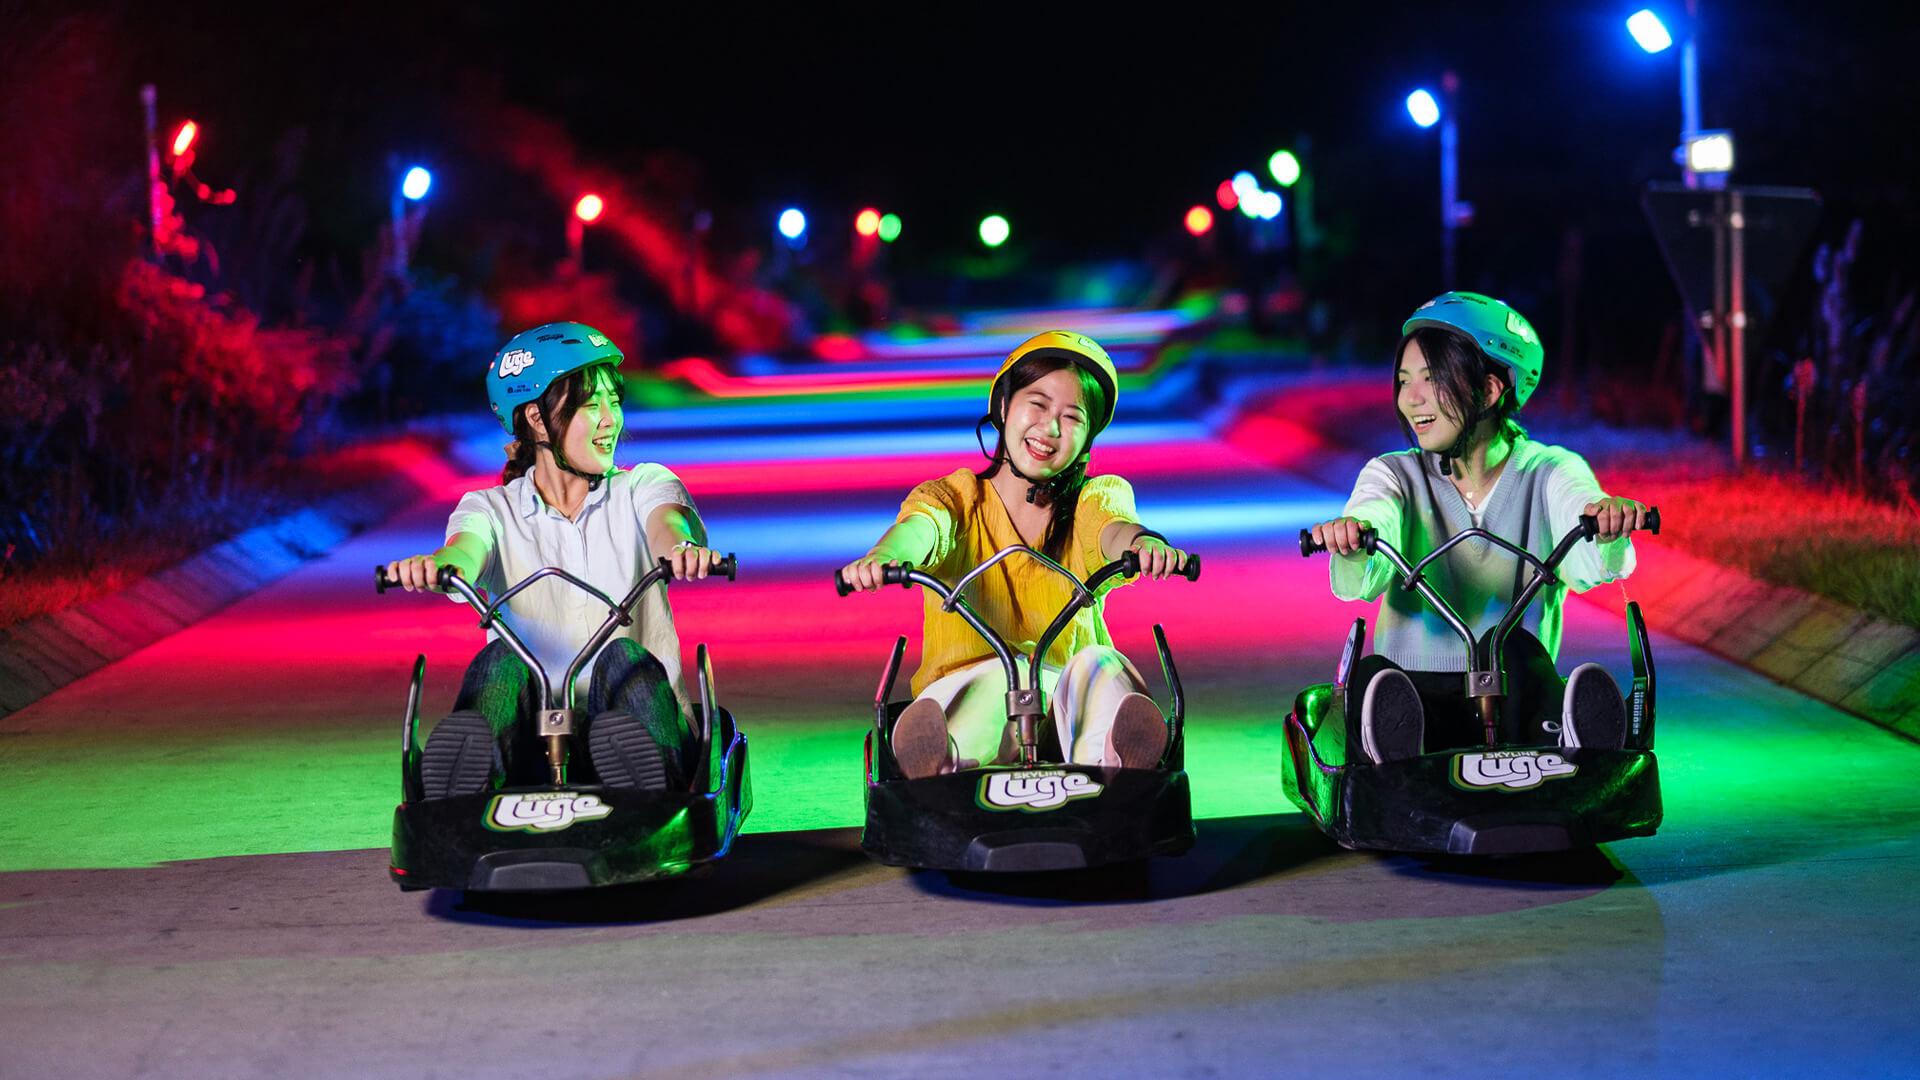 Friends enjoy the Night Luge experience together at Skyline Luge Tongyeong.